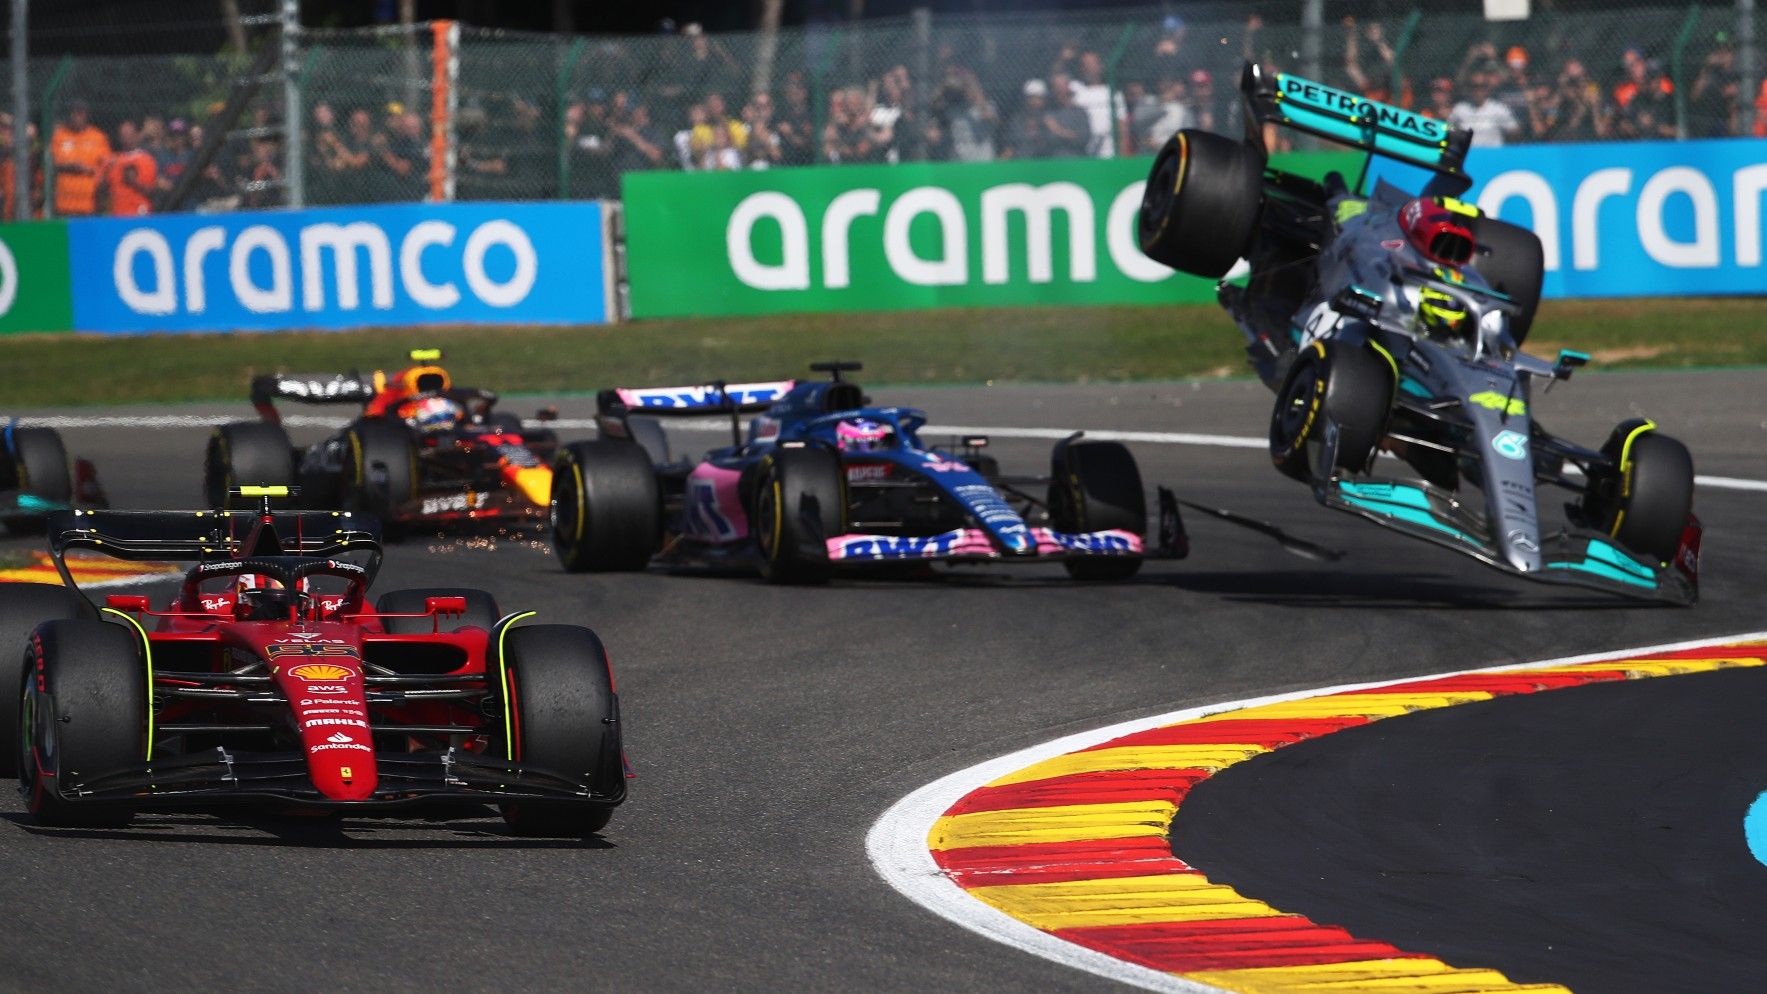 Carlos Sainz of Spain driving (55) the Ferrari F1-75 leads the field as Fernando Alonso of Spain driving the (14) Alpine F1 A522 Renault and Lewis Hamilton of Great Britain driving the (44) Mercedes AMG Petronas F1 Team W13 crash during the F1 Grand Prix of Belgium 